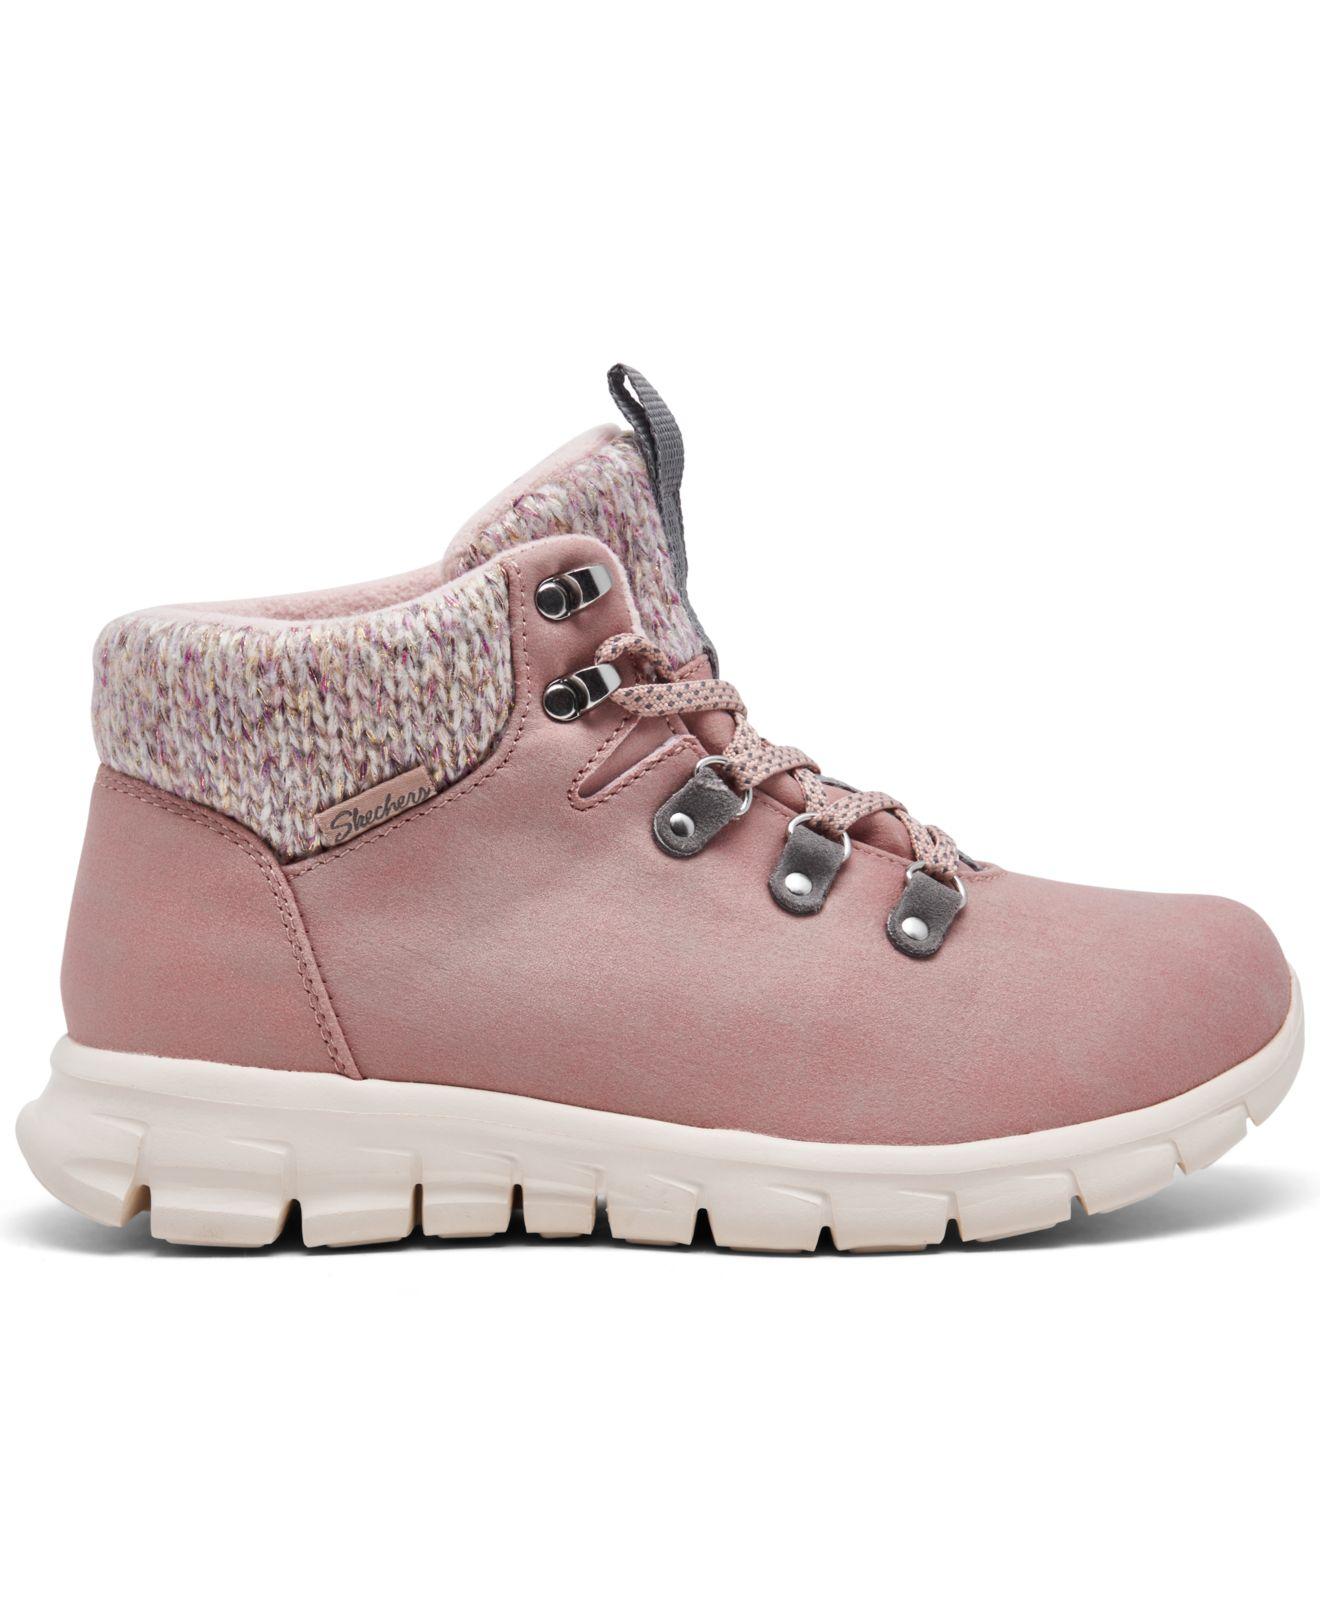 Skechers Synergy - Pretty Hiker Hiking From Finish Line in Pink |